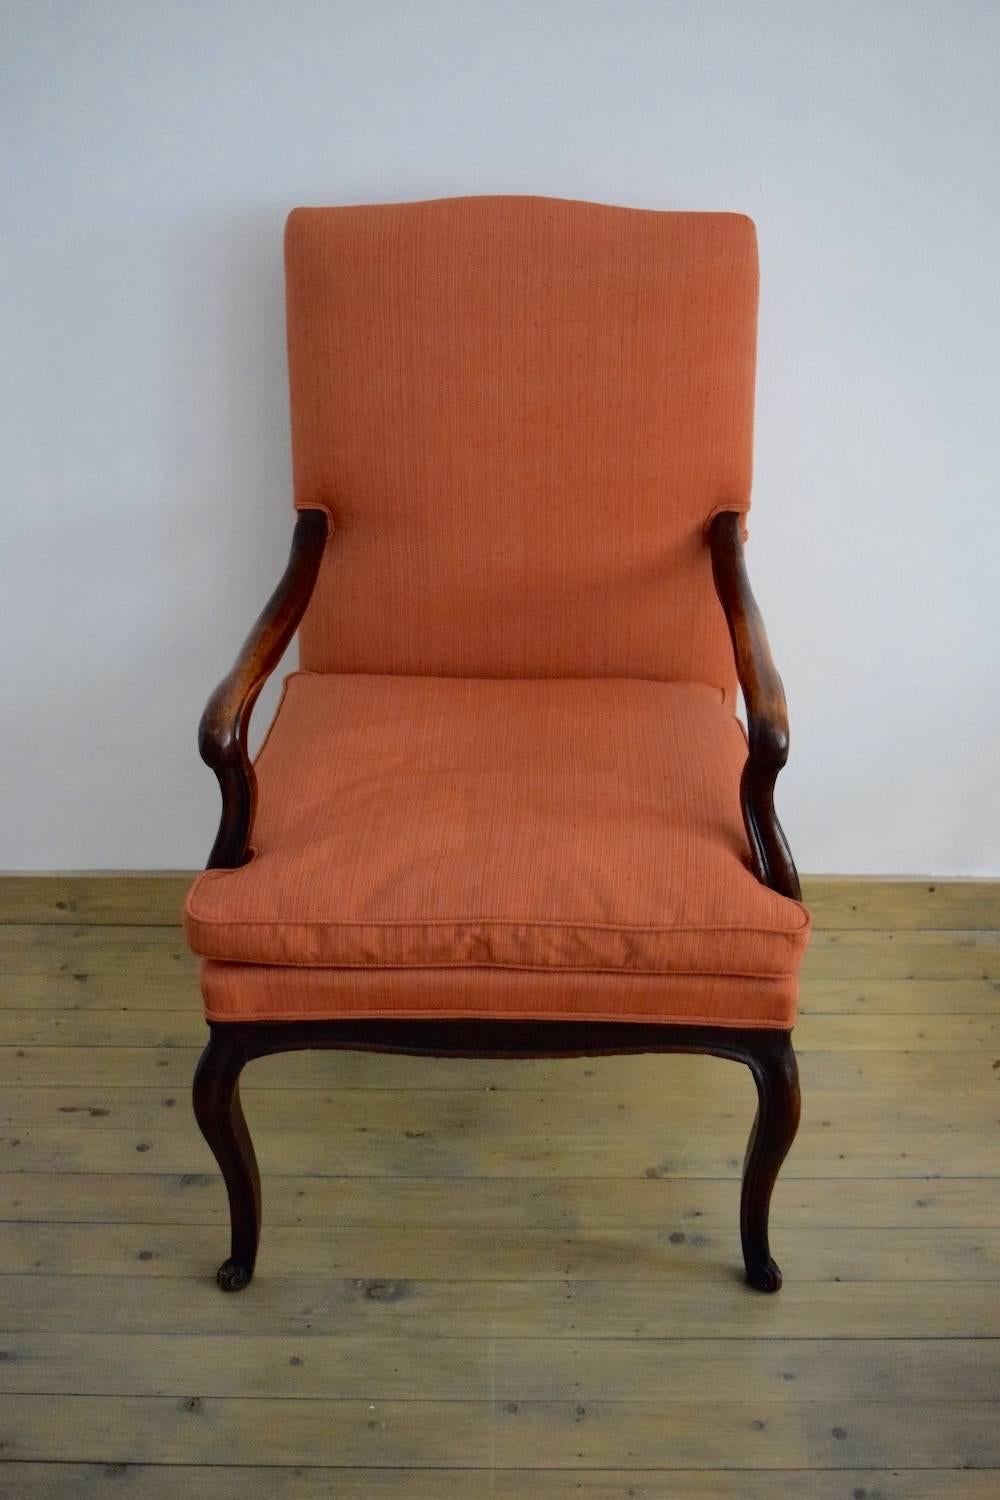 French, polished dark burr wood armchair upholstered in pale-red linen,
early to mid-18th century.